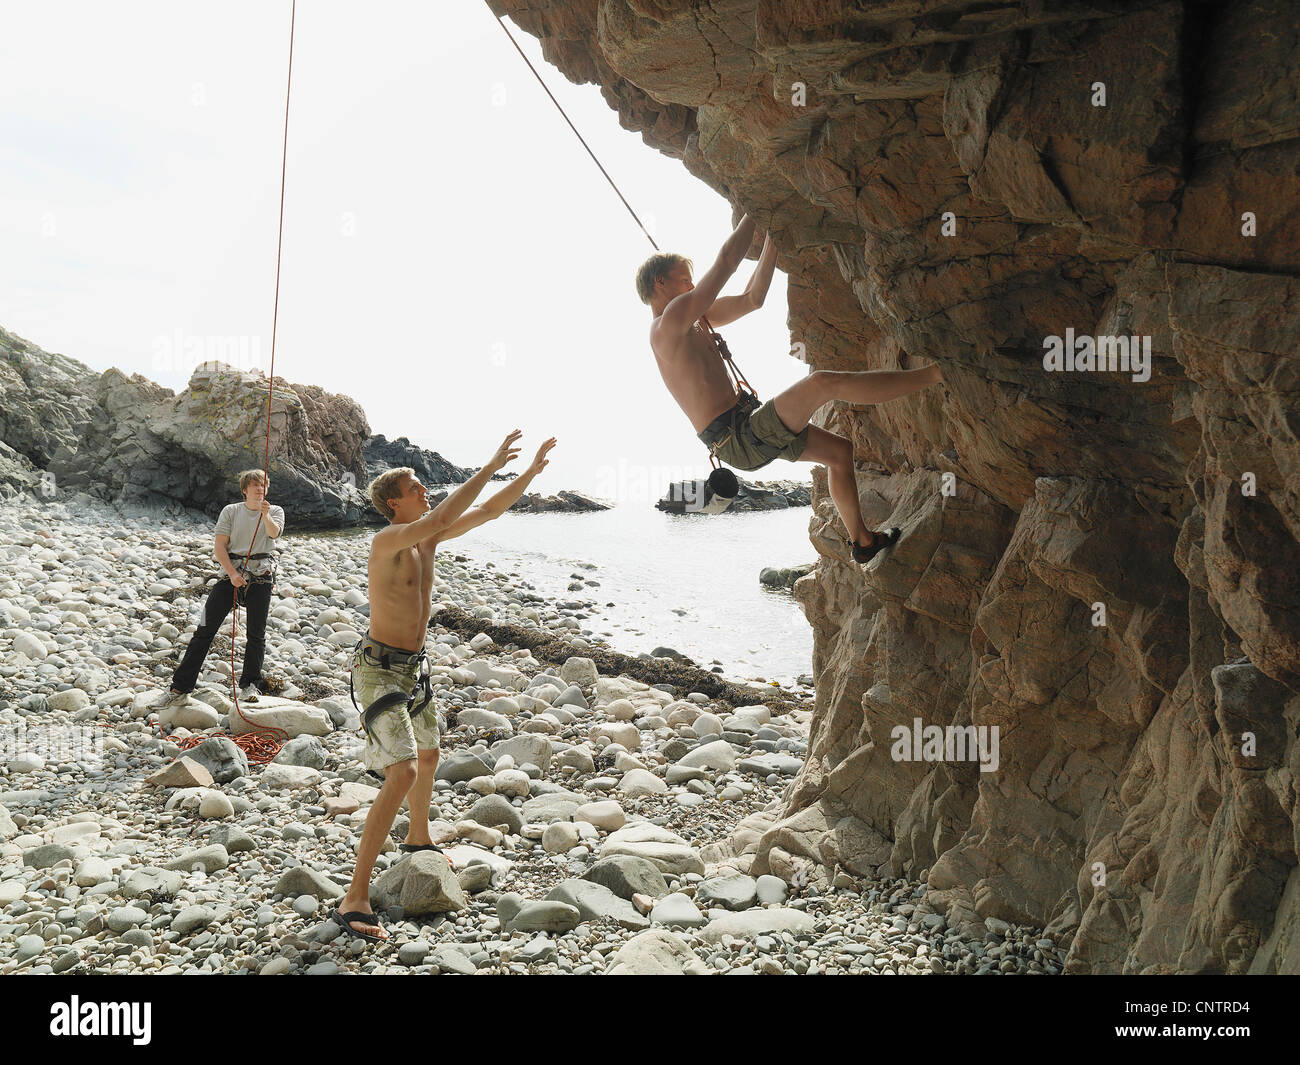 Rock climbers rappelling down rock face Stock Photo